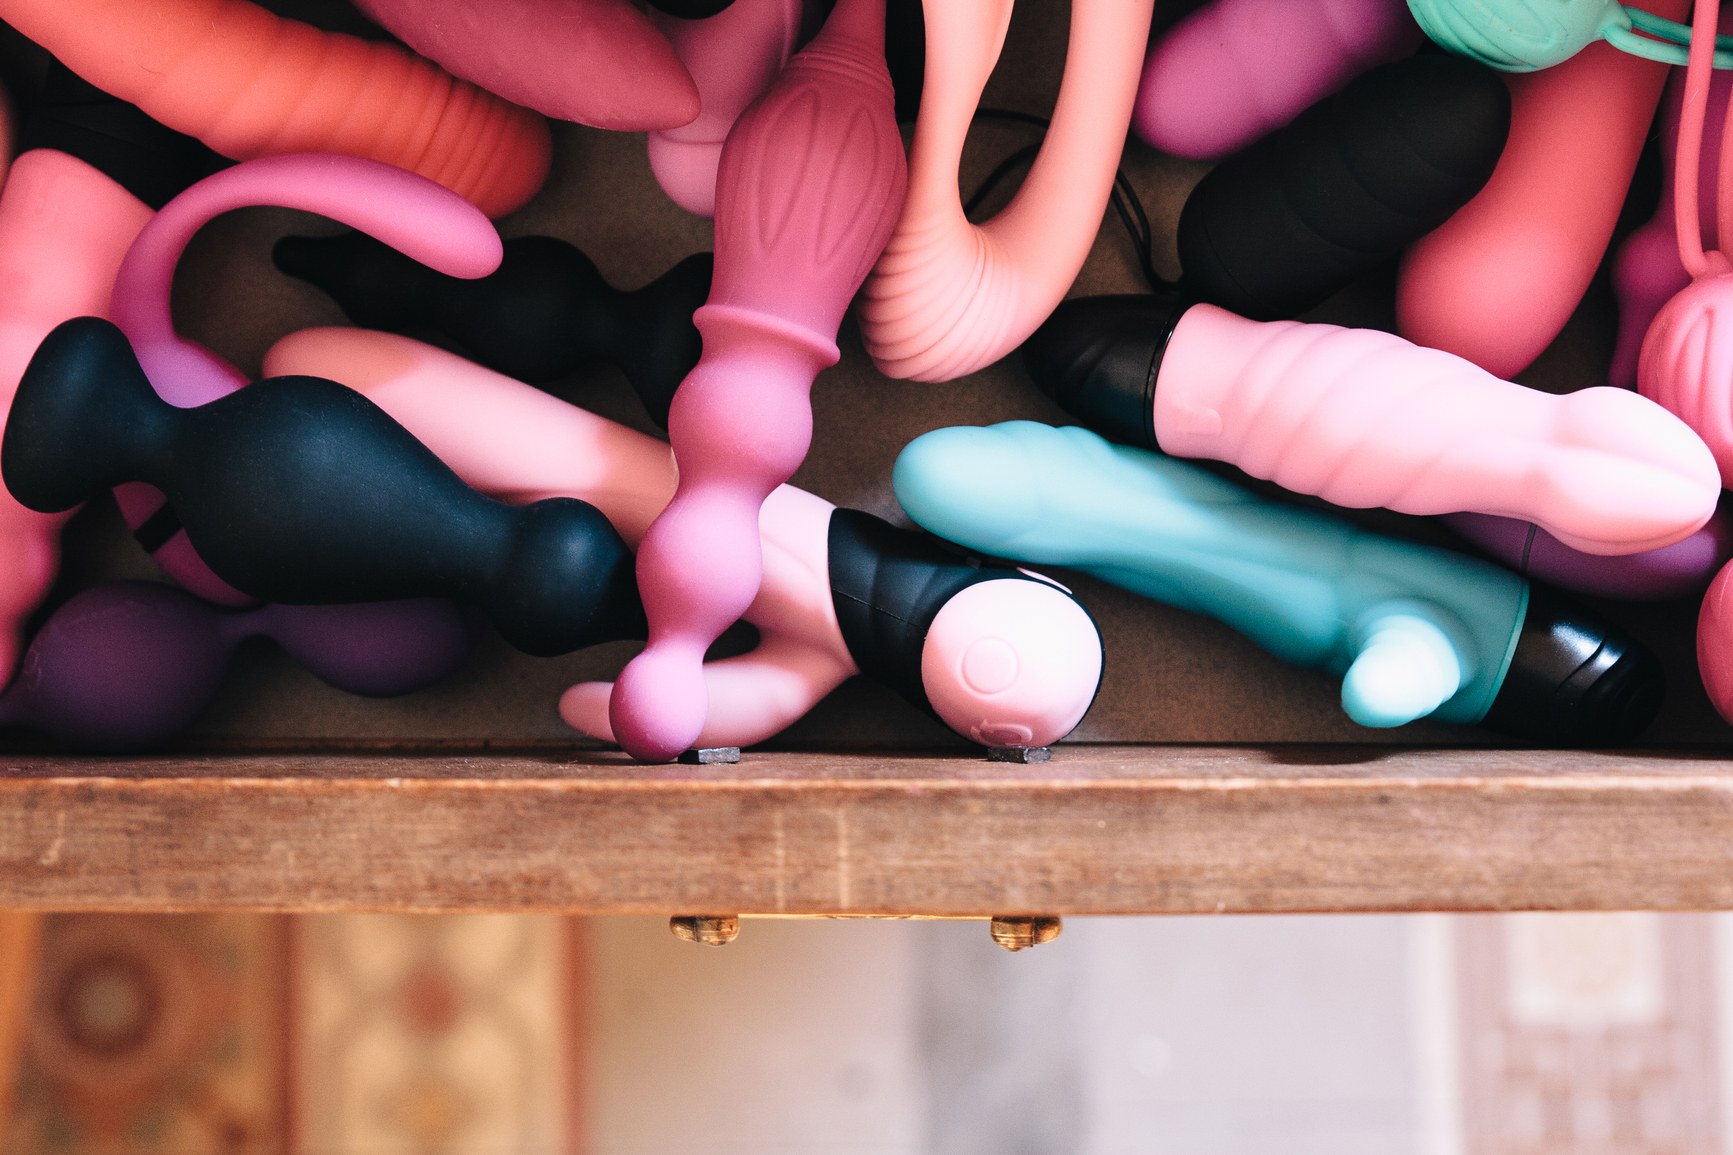 Smart Dildos And Vibrators Keep Getting Hacked But Tor Could Be The Answer To Safer Connected Sex